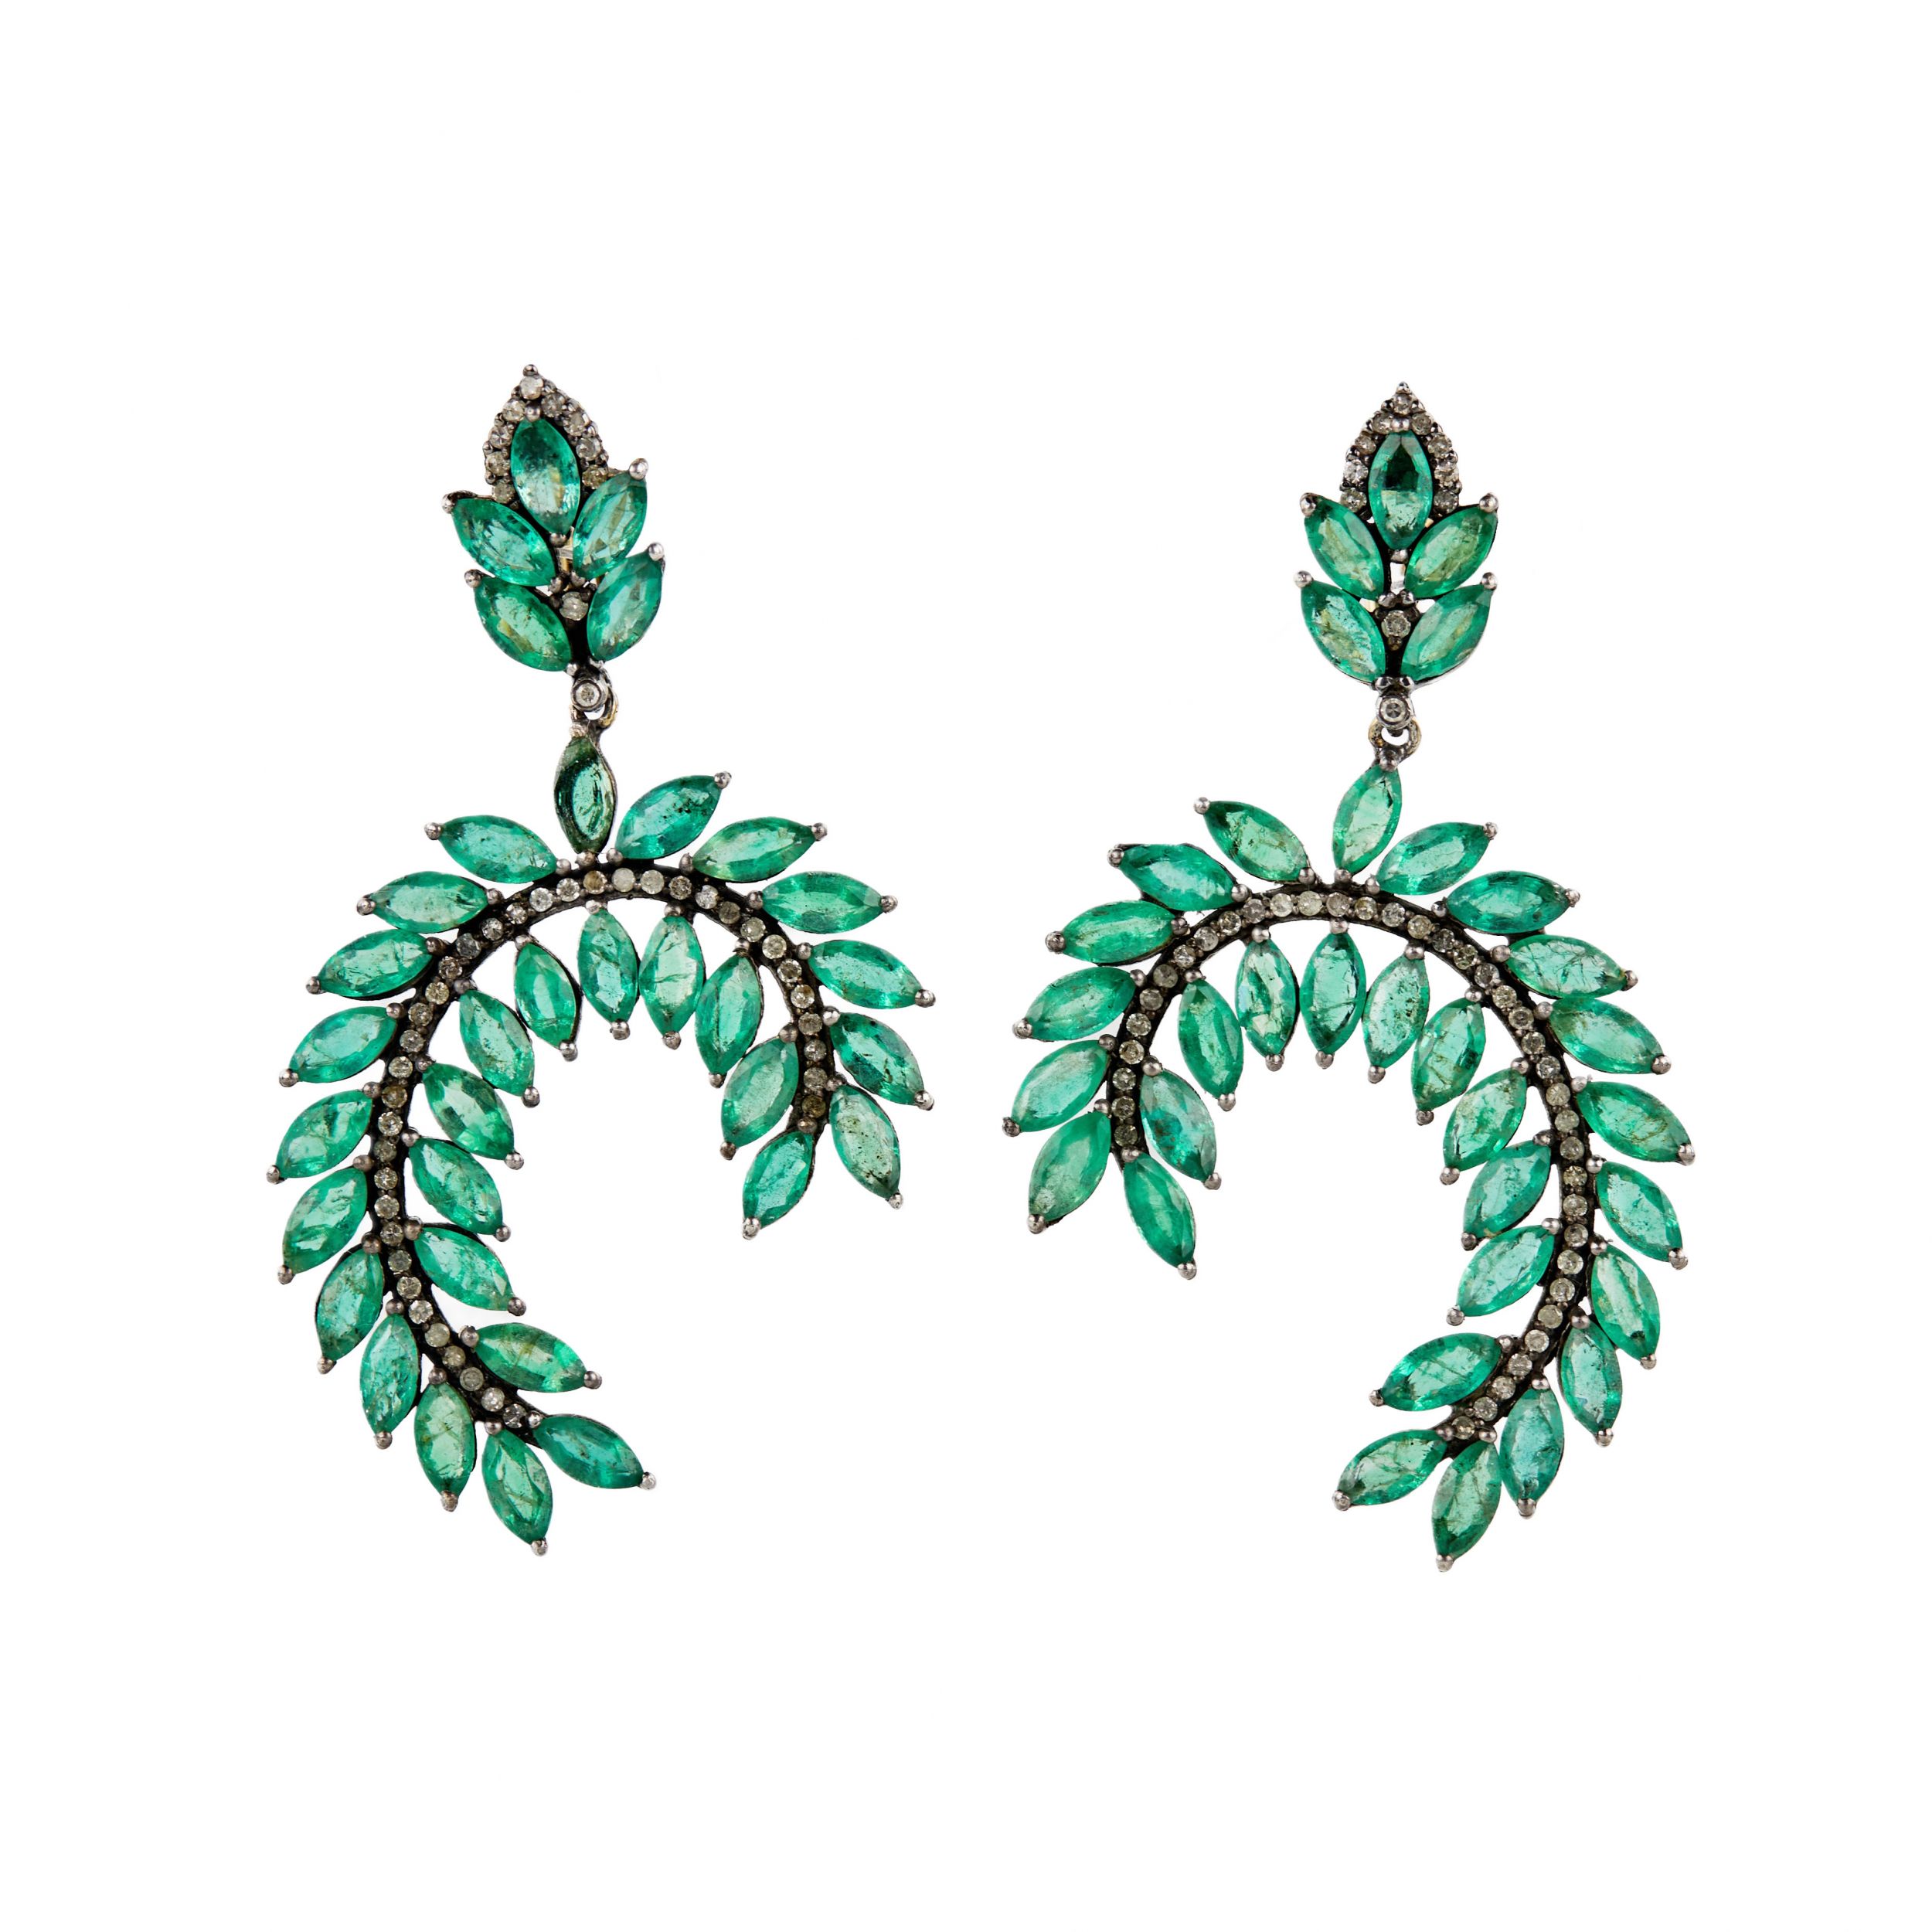 Silver earrings with emeralds and diamonds. - Image 8 of 14